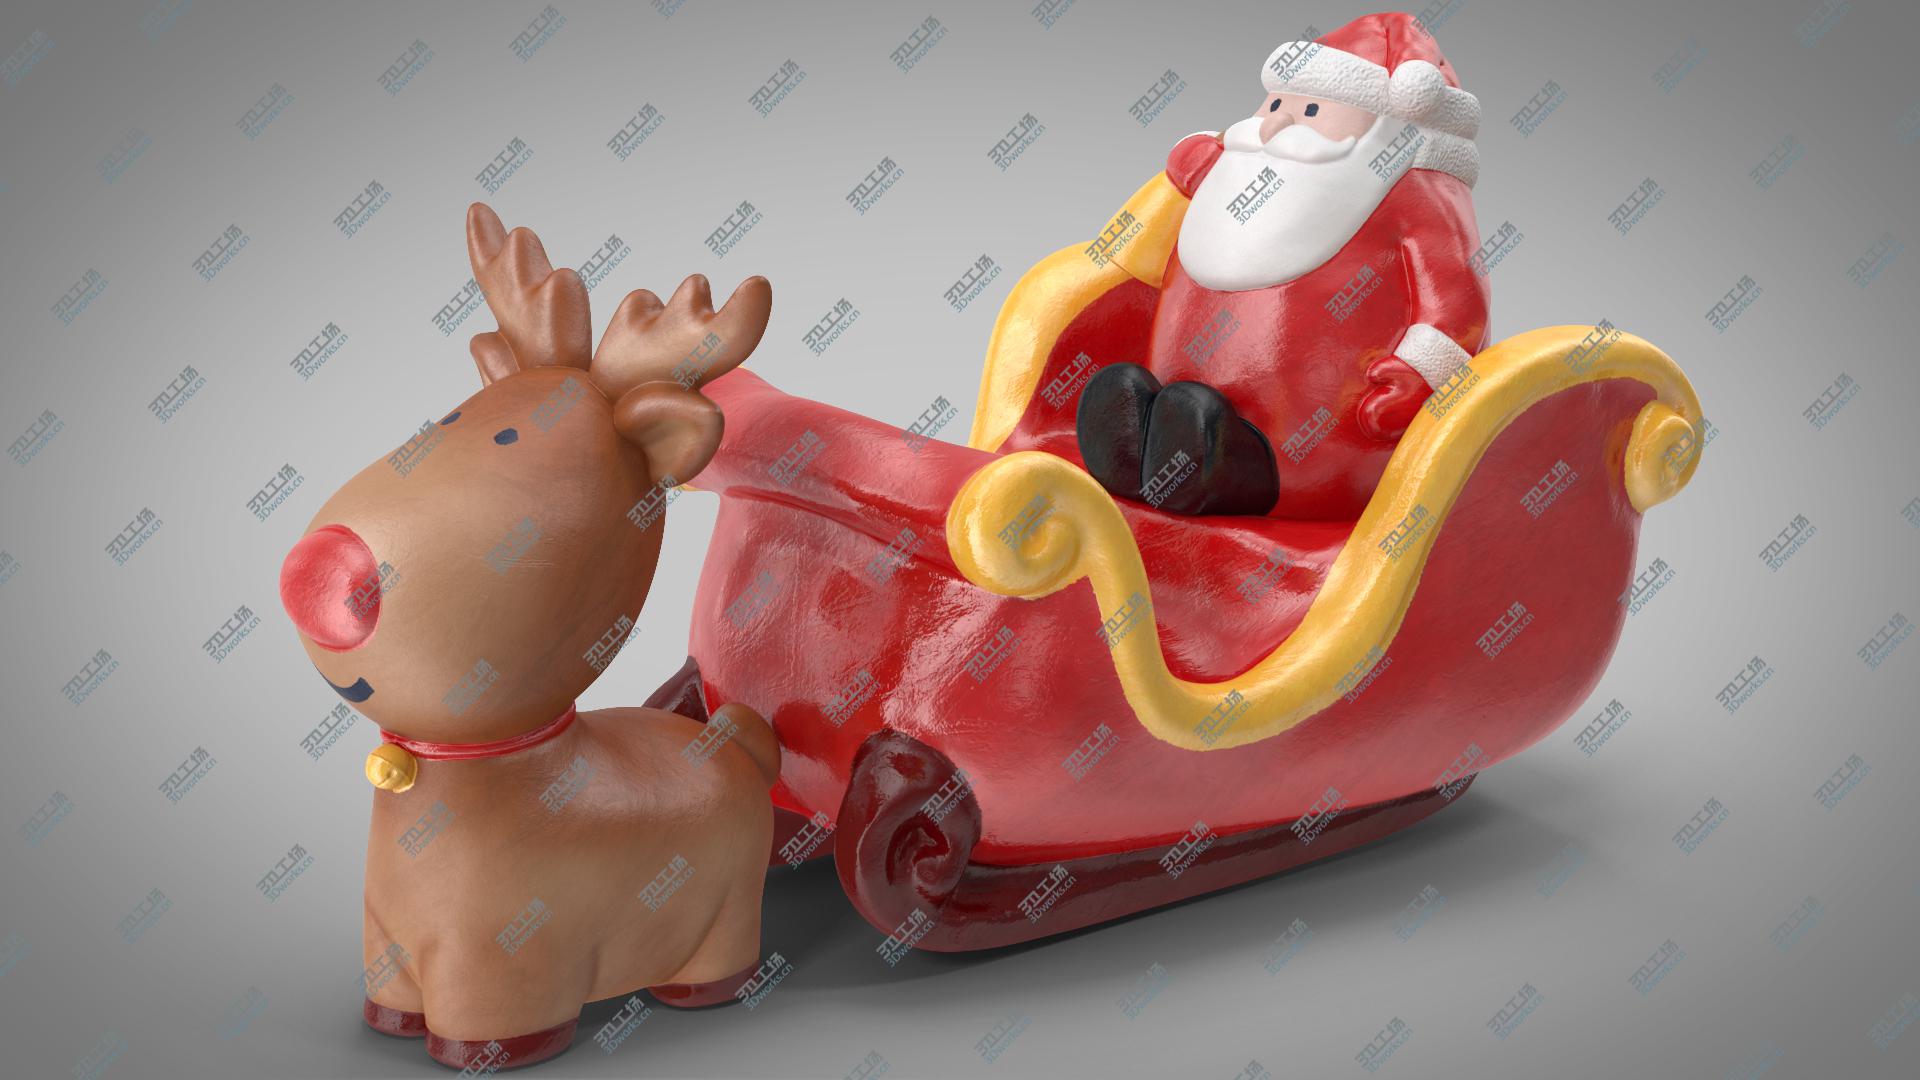 images/goods_img/202105071/3D Santa Claus with Sleigh Decorative Figurine model/3.jpg